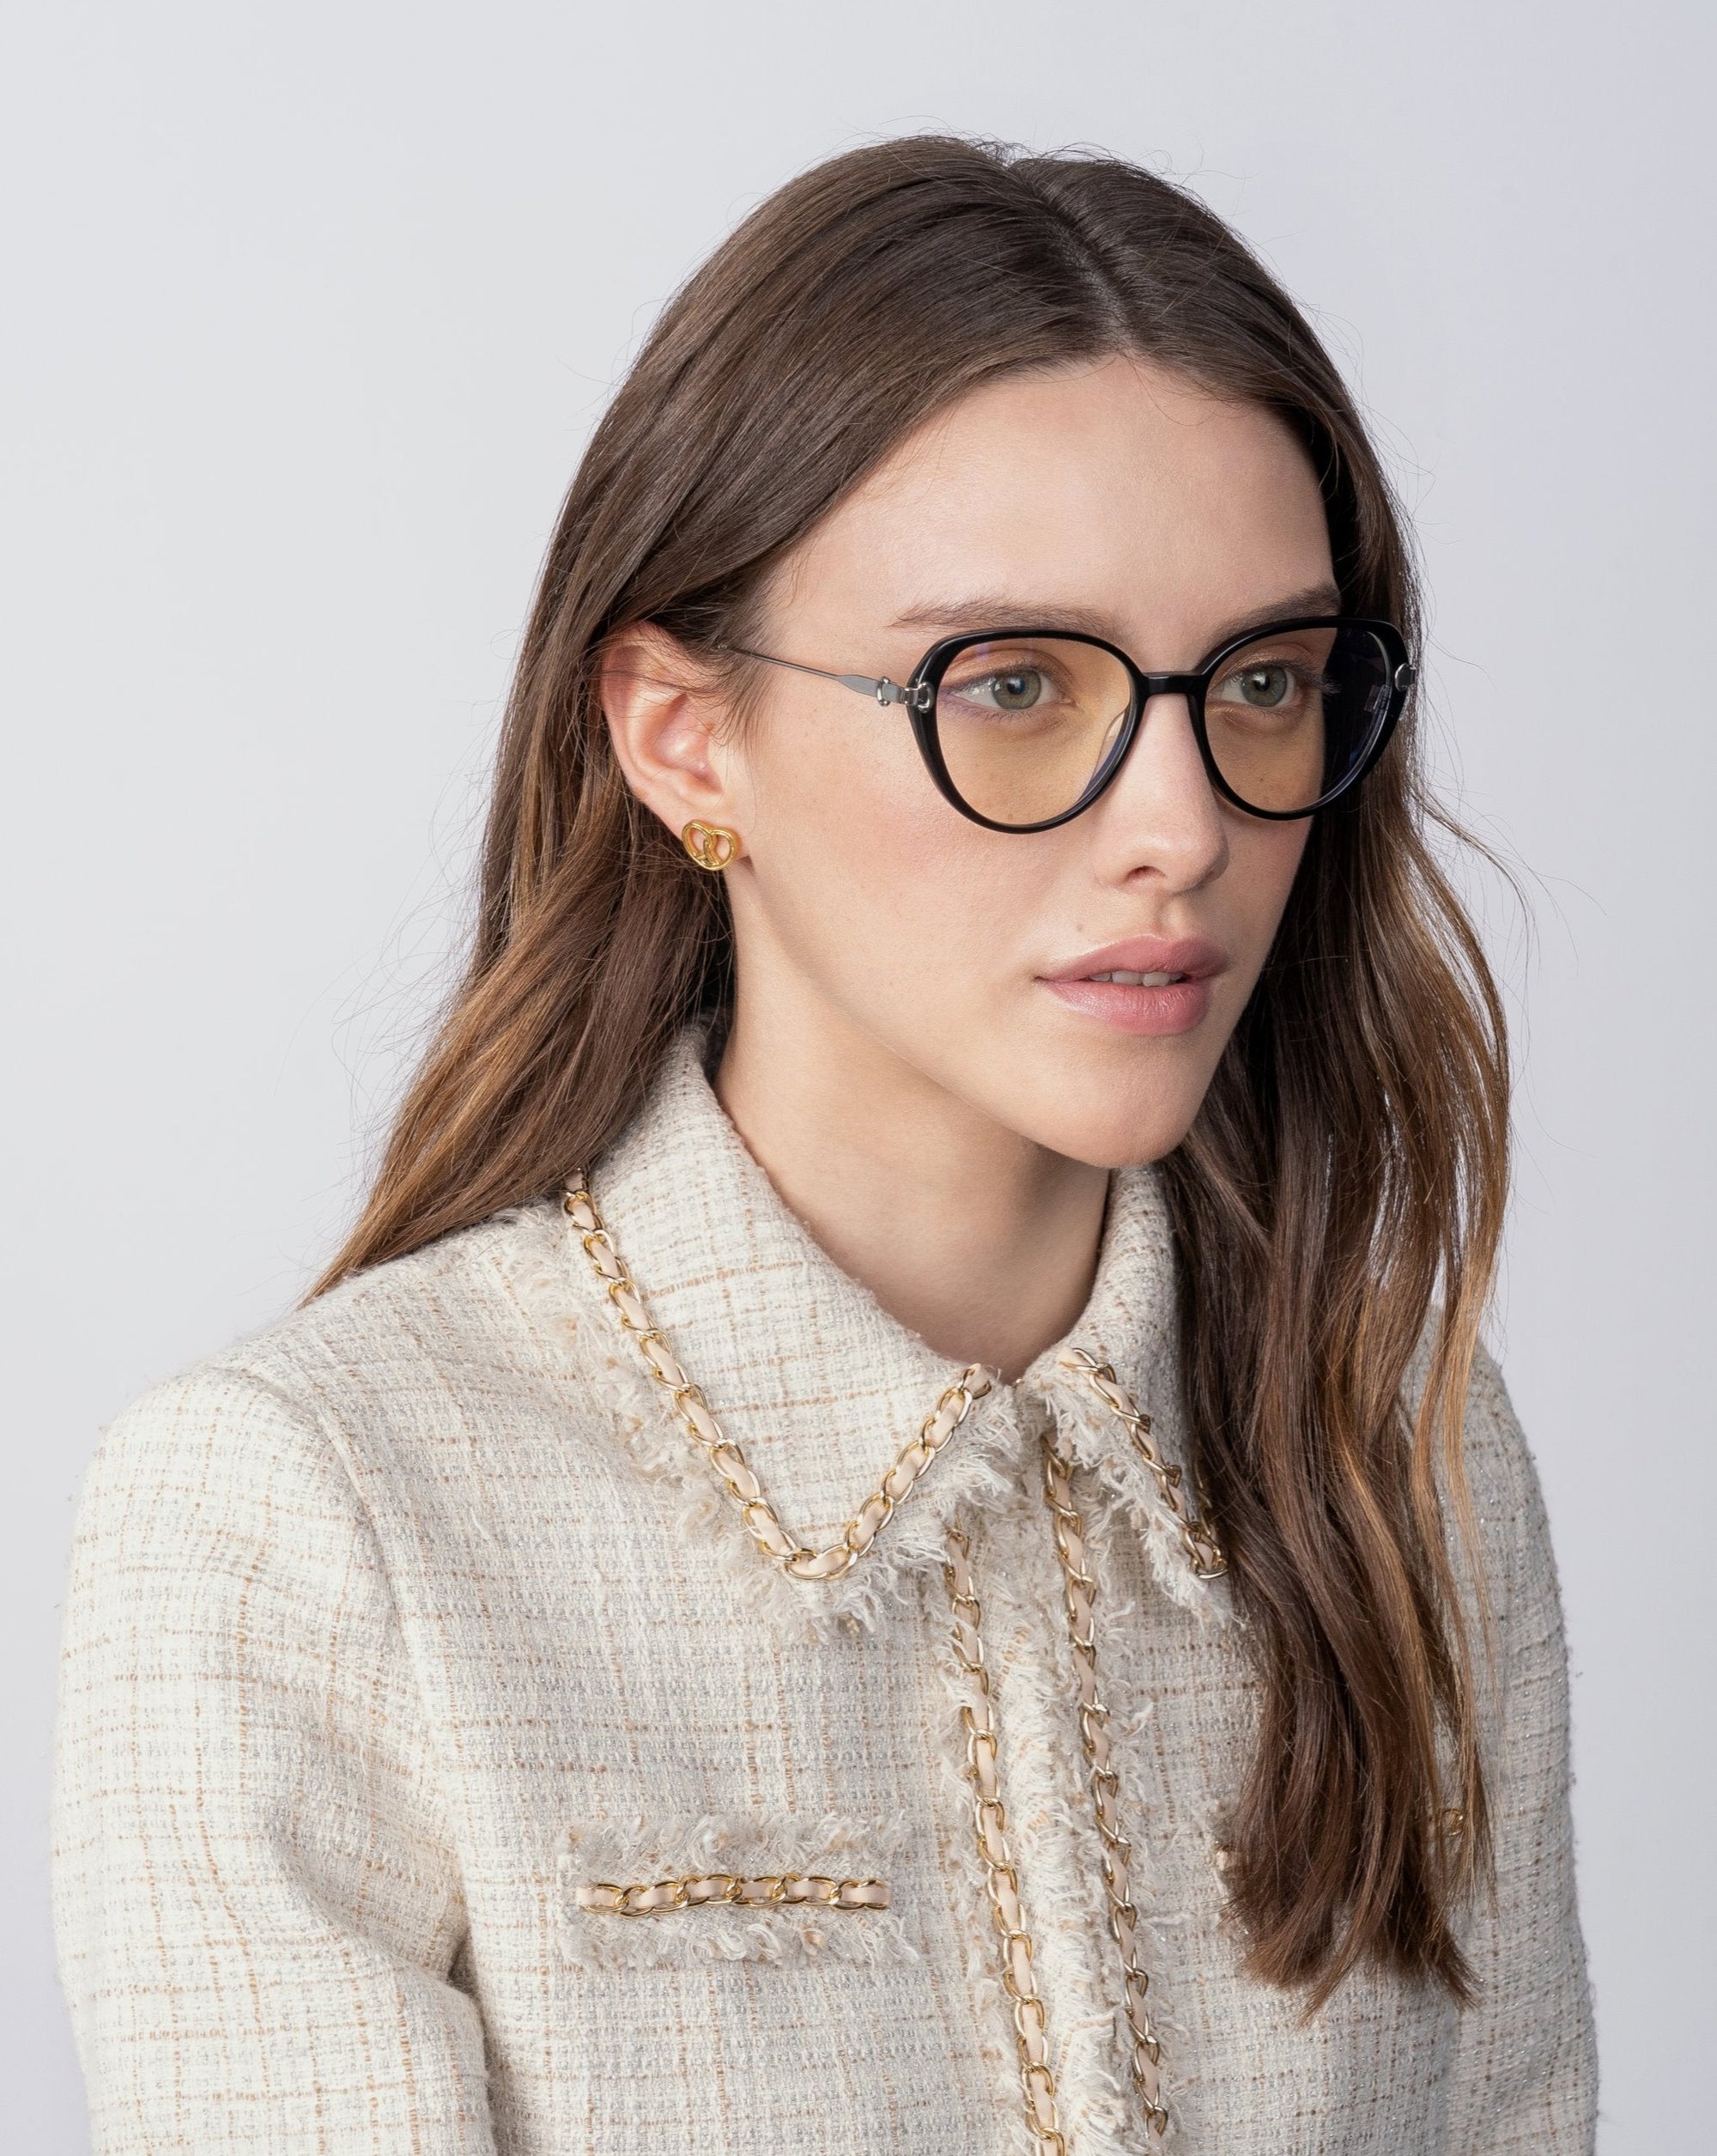 A woman with long, brown hair wearing For Art's Sake® Waterhouse glasses with prescription lenses and a beige textured jacket adorned with 18-karat gold-plated chain detailing. She has small gold stud earrings and is looking slightly to the side against a plain, light gray background.